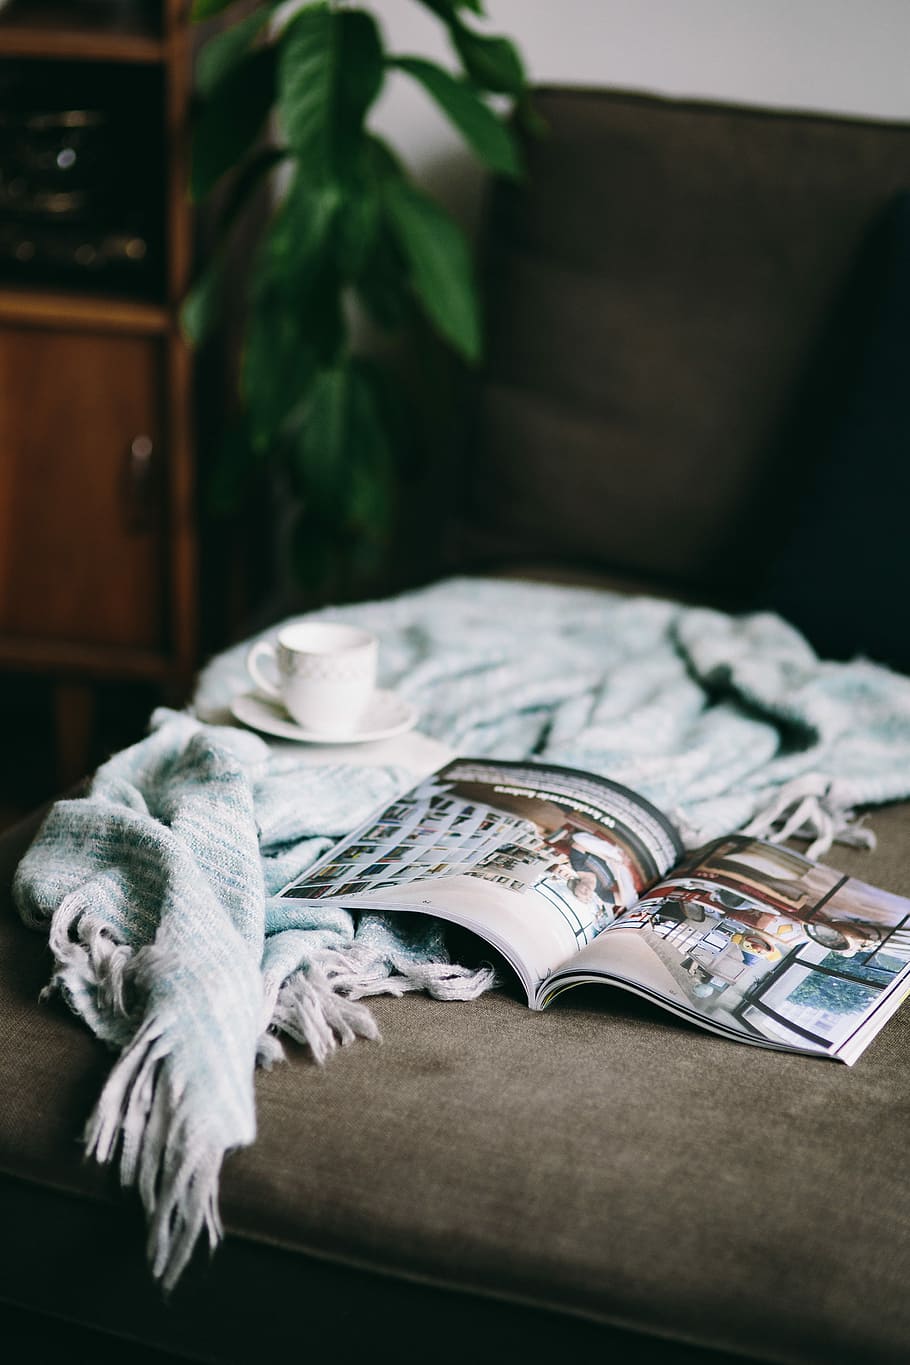 resting, magazine, cute, puppy, interior, relax, relaxing, read, reading, chaise longue